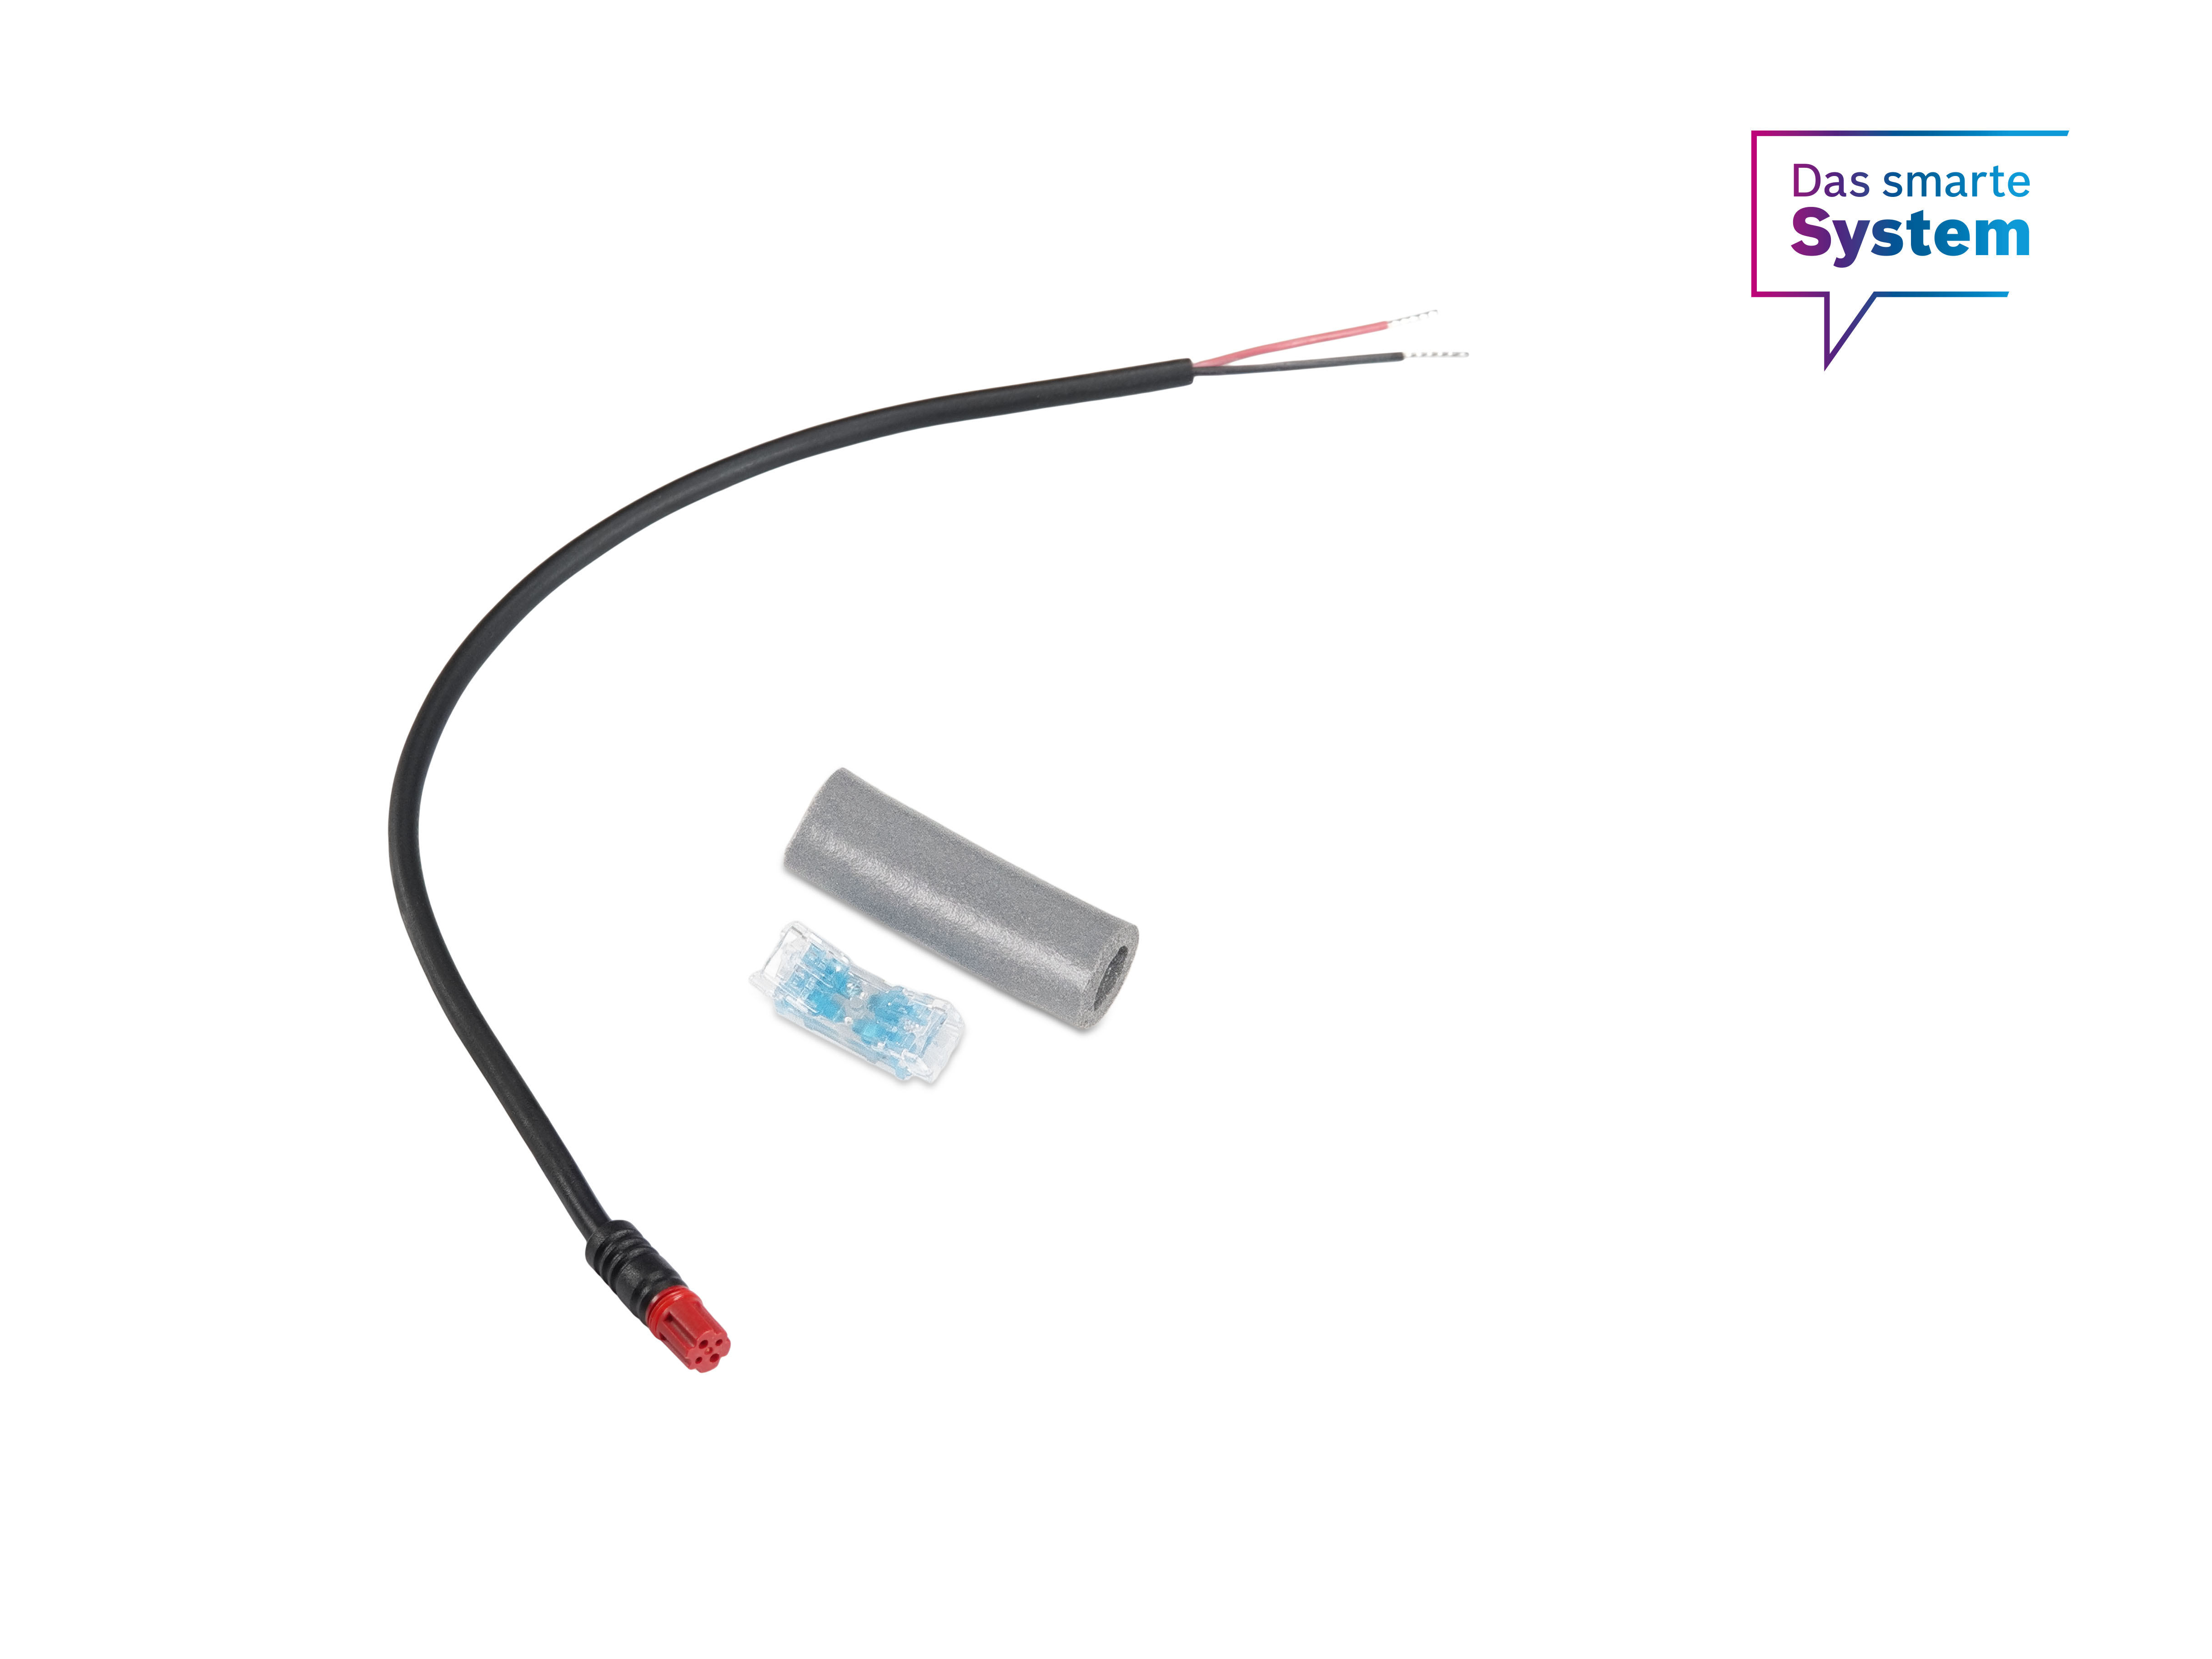 Lightcable for E-Bikes (taillight)